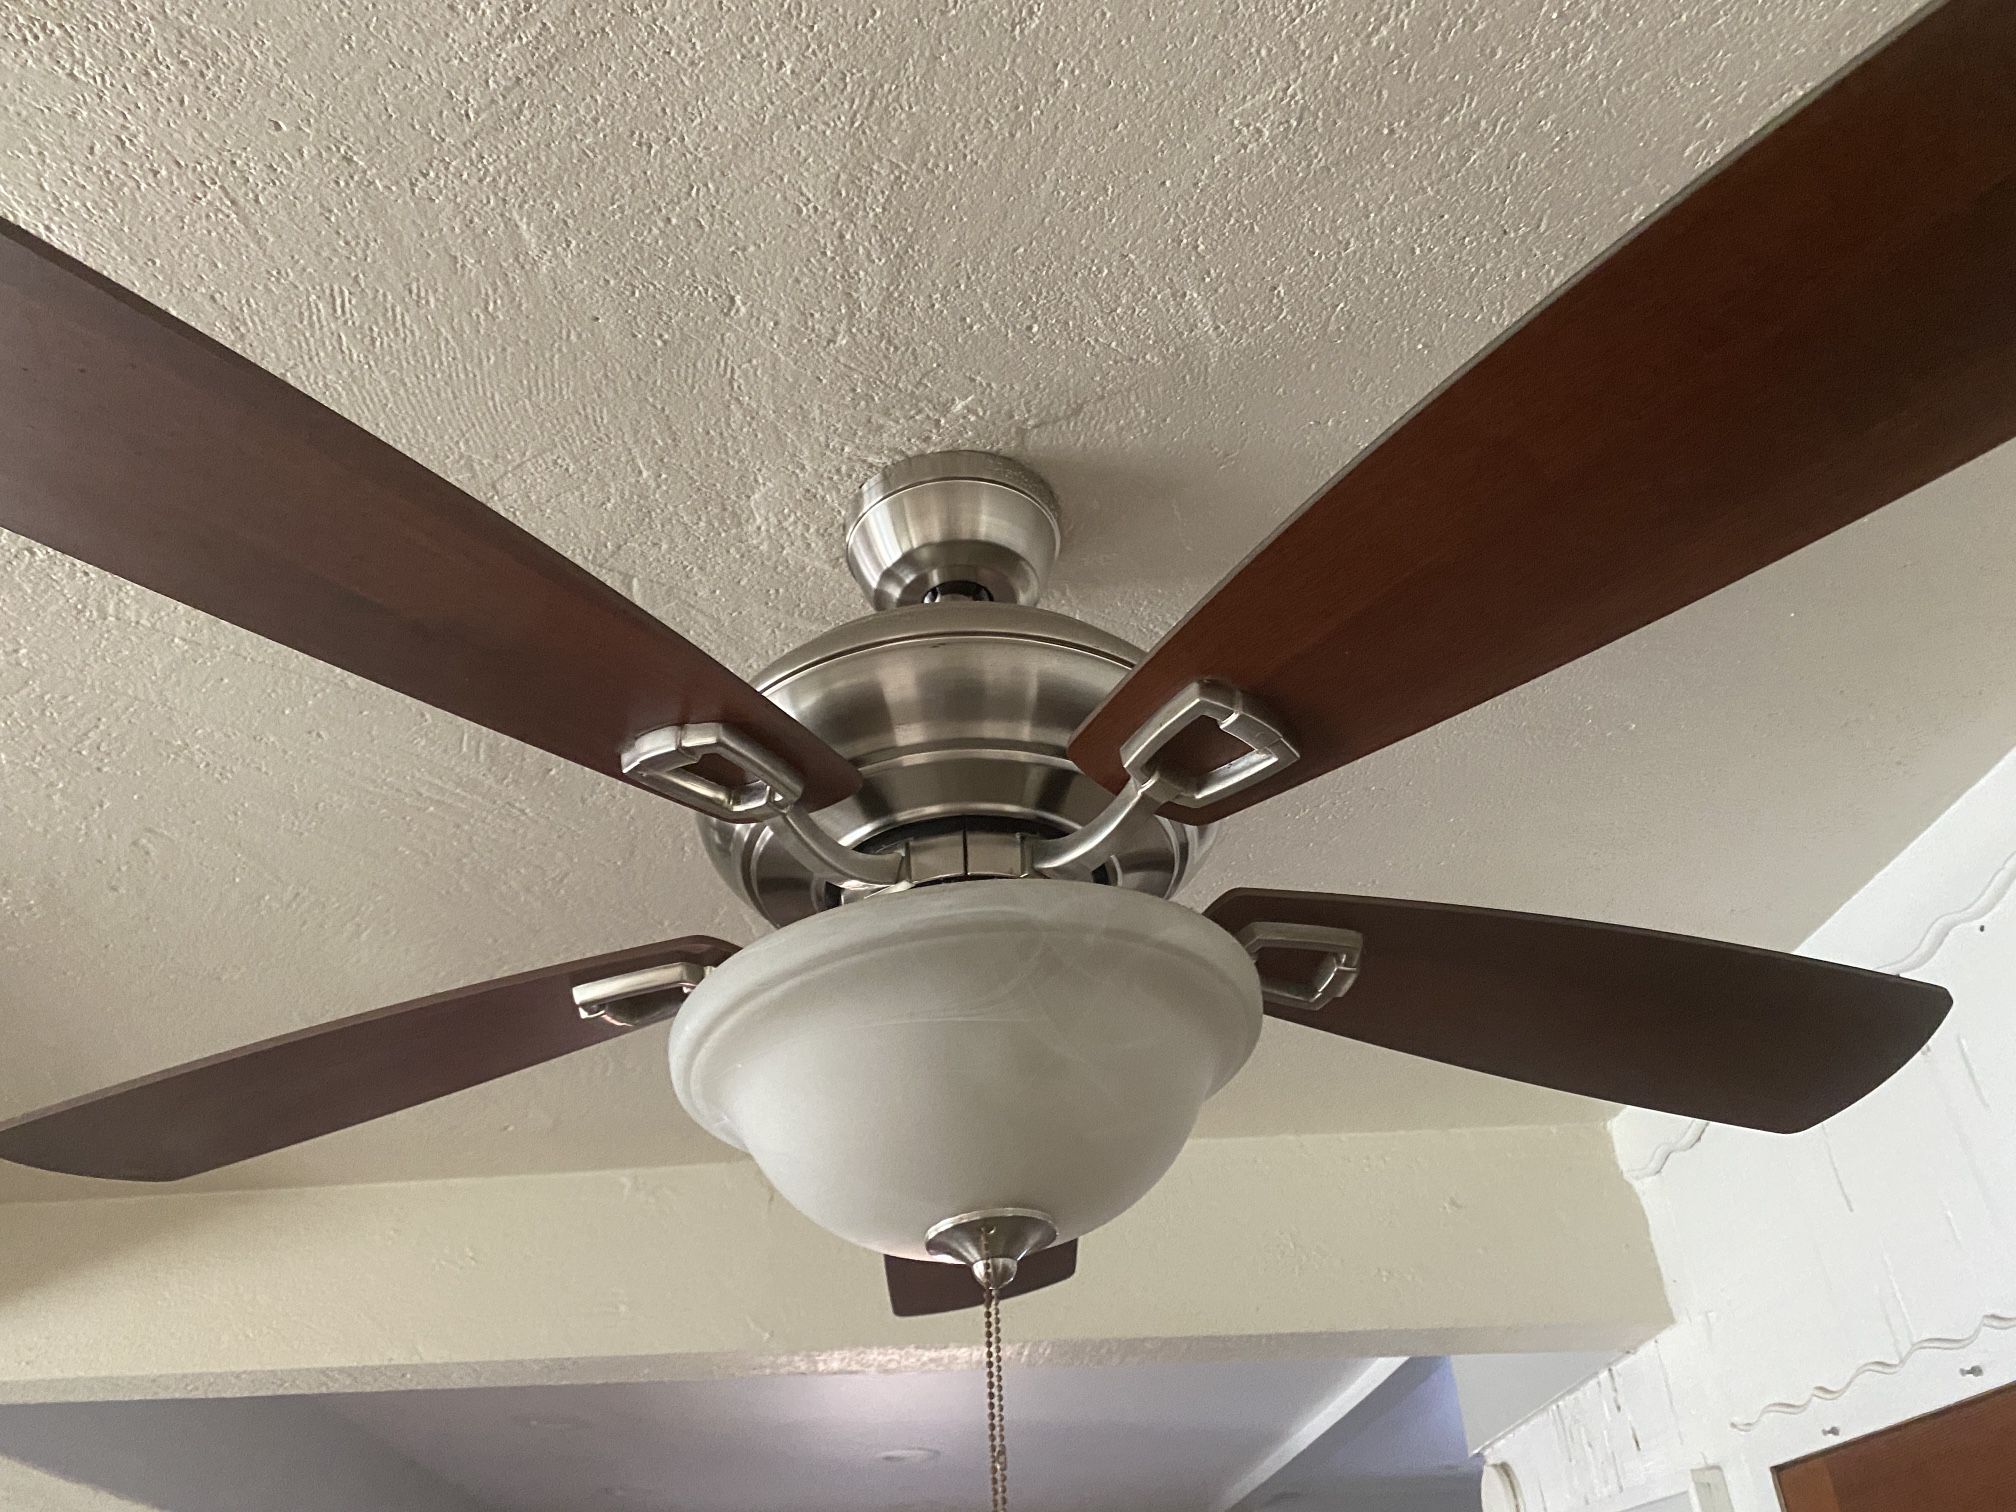 Three Speed Ceiling Fan With Light Fixture